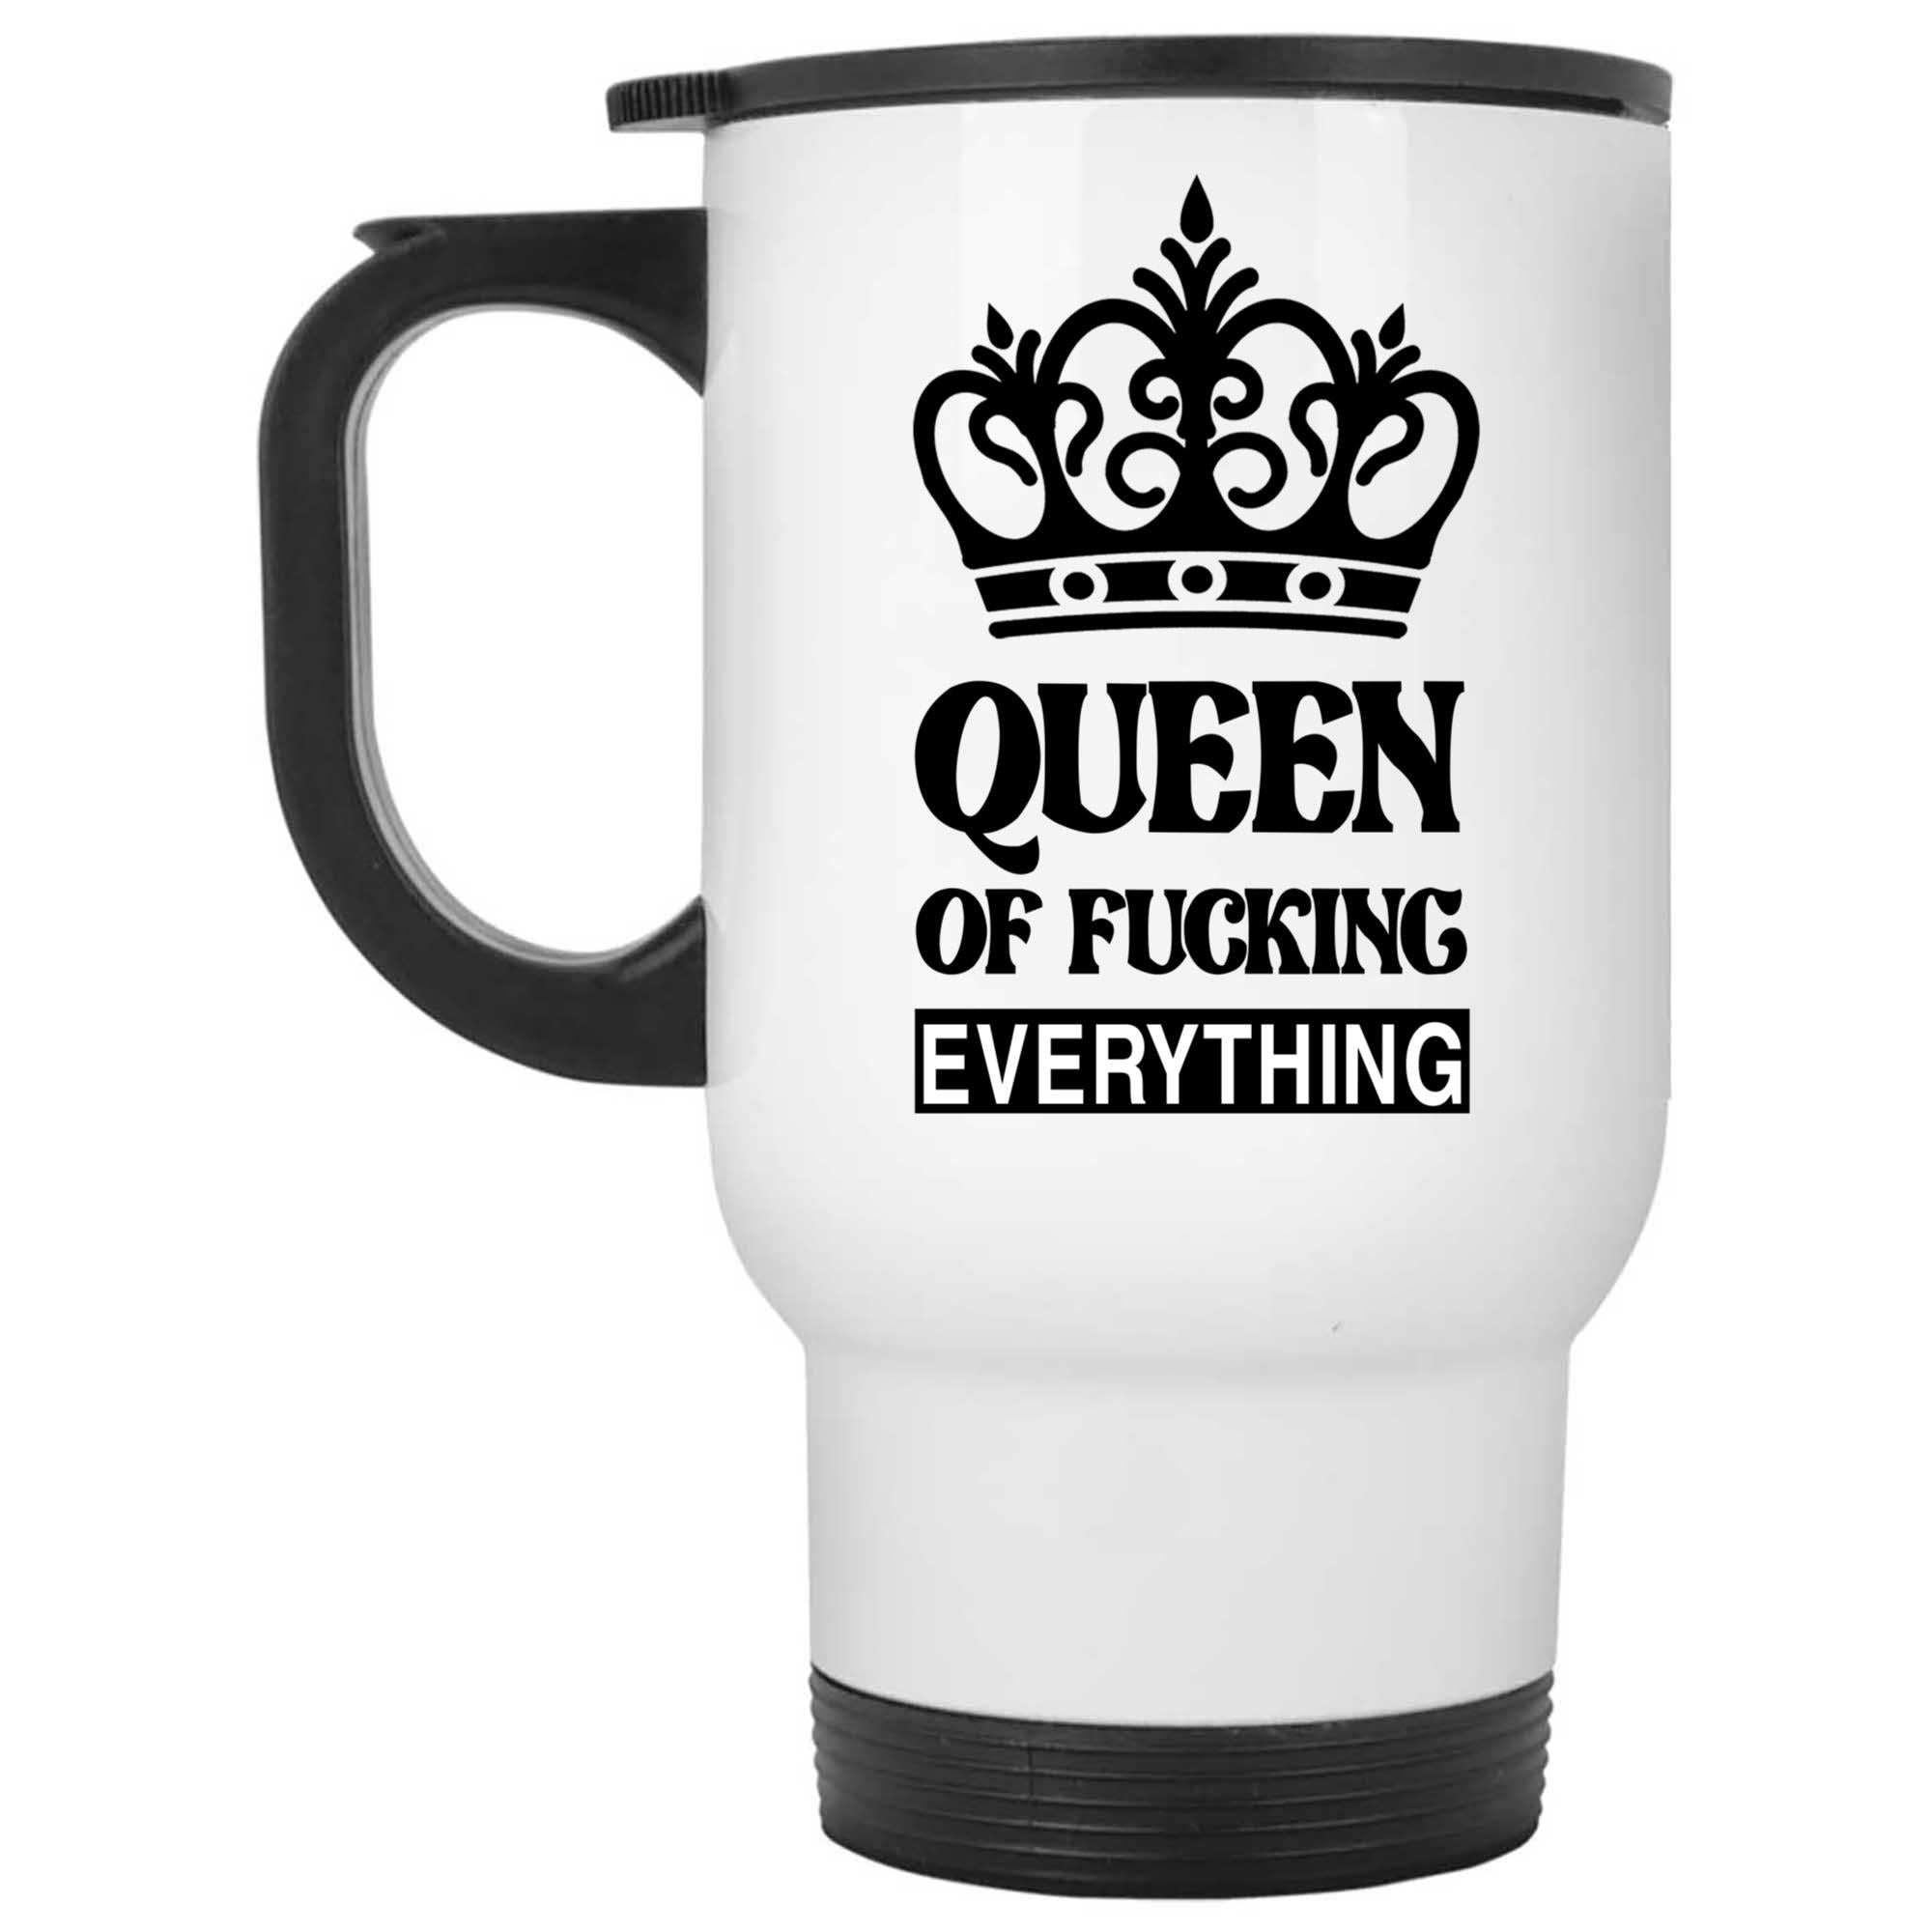 Skitongifts Coffee Mug Funny Ceramic Novelty M26-Kl221221-Queen Of Fucking Everything Hztvbqe